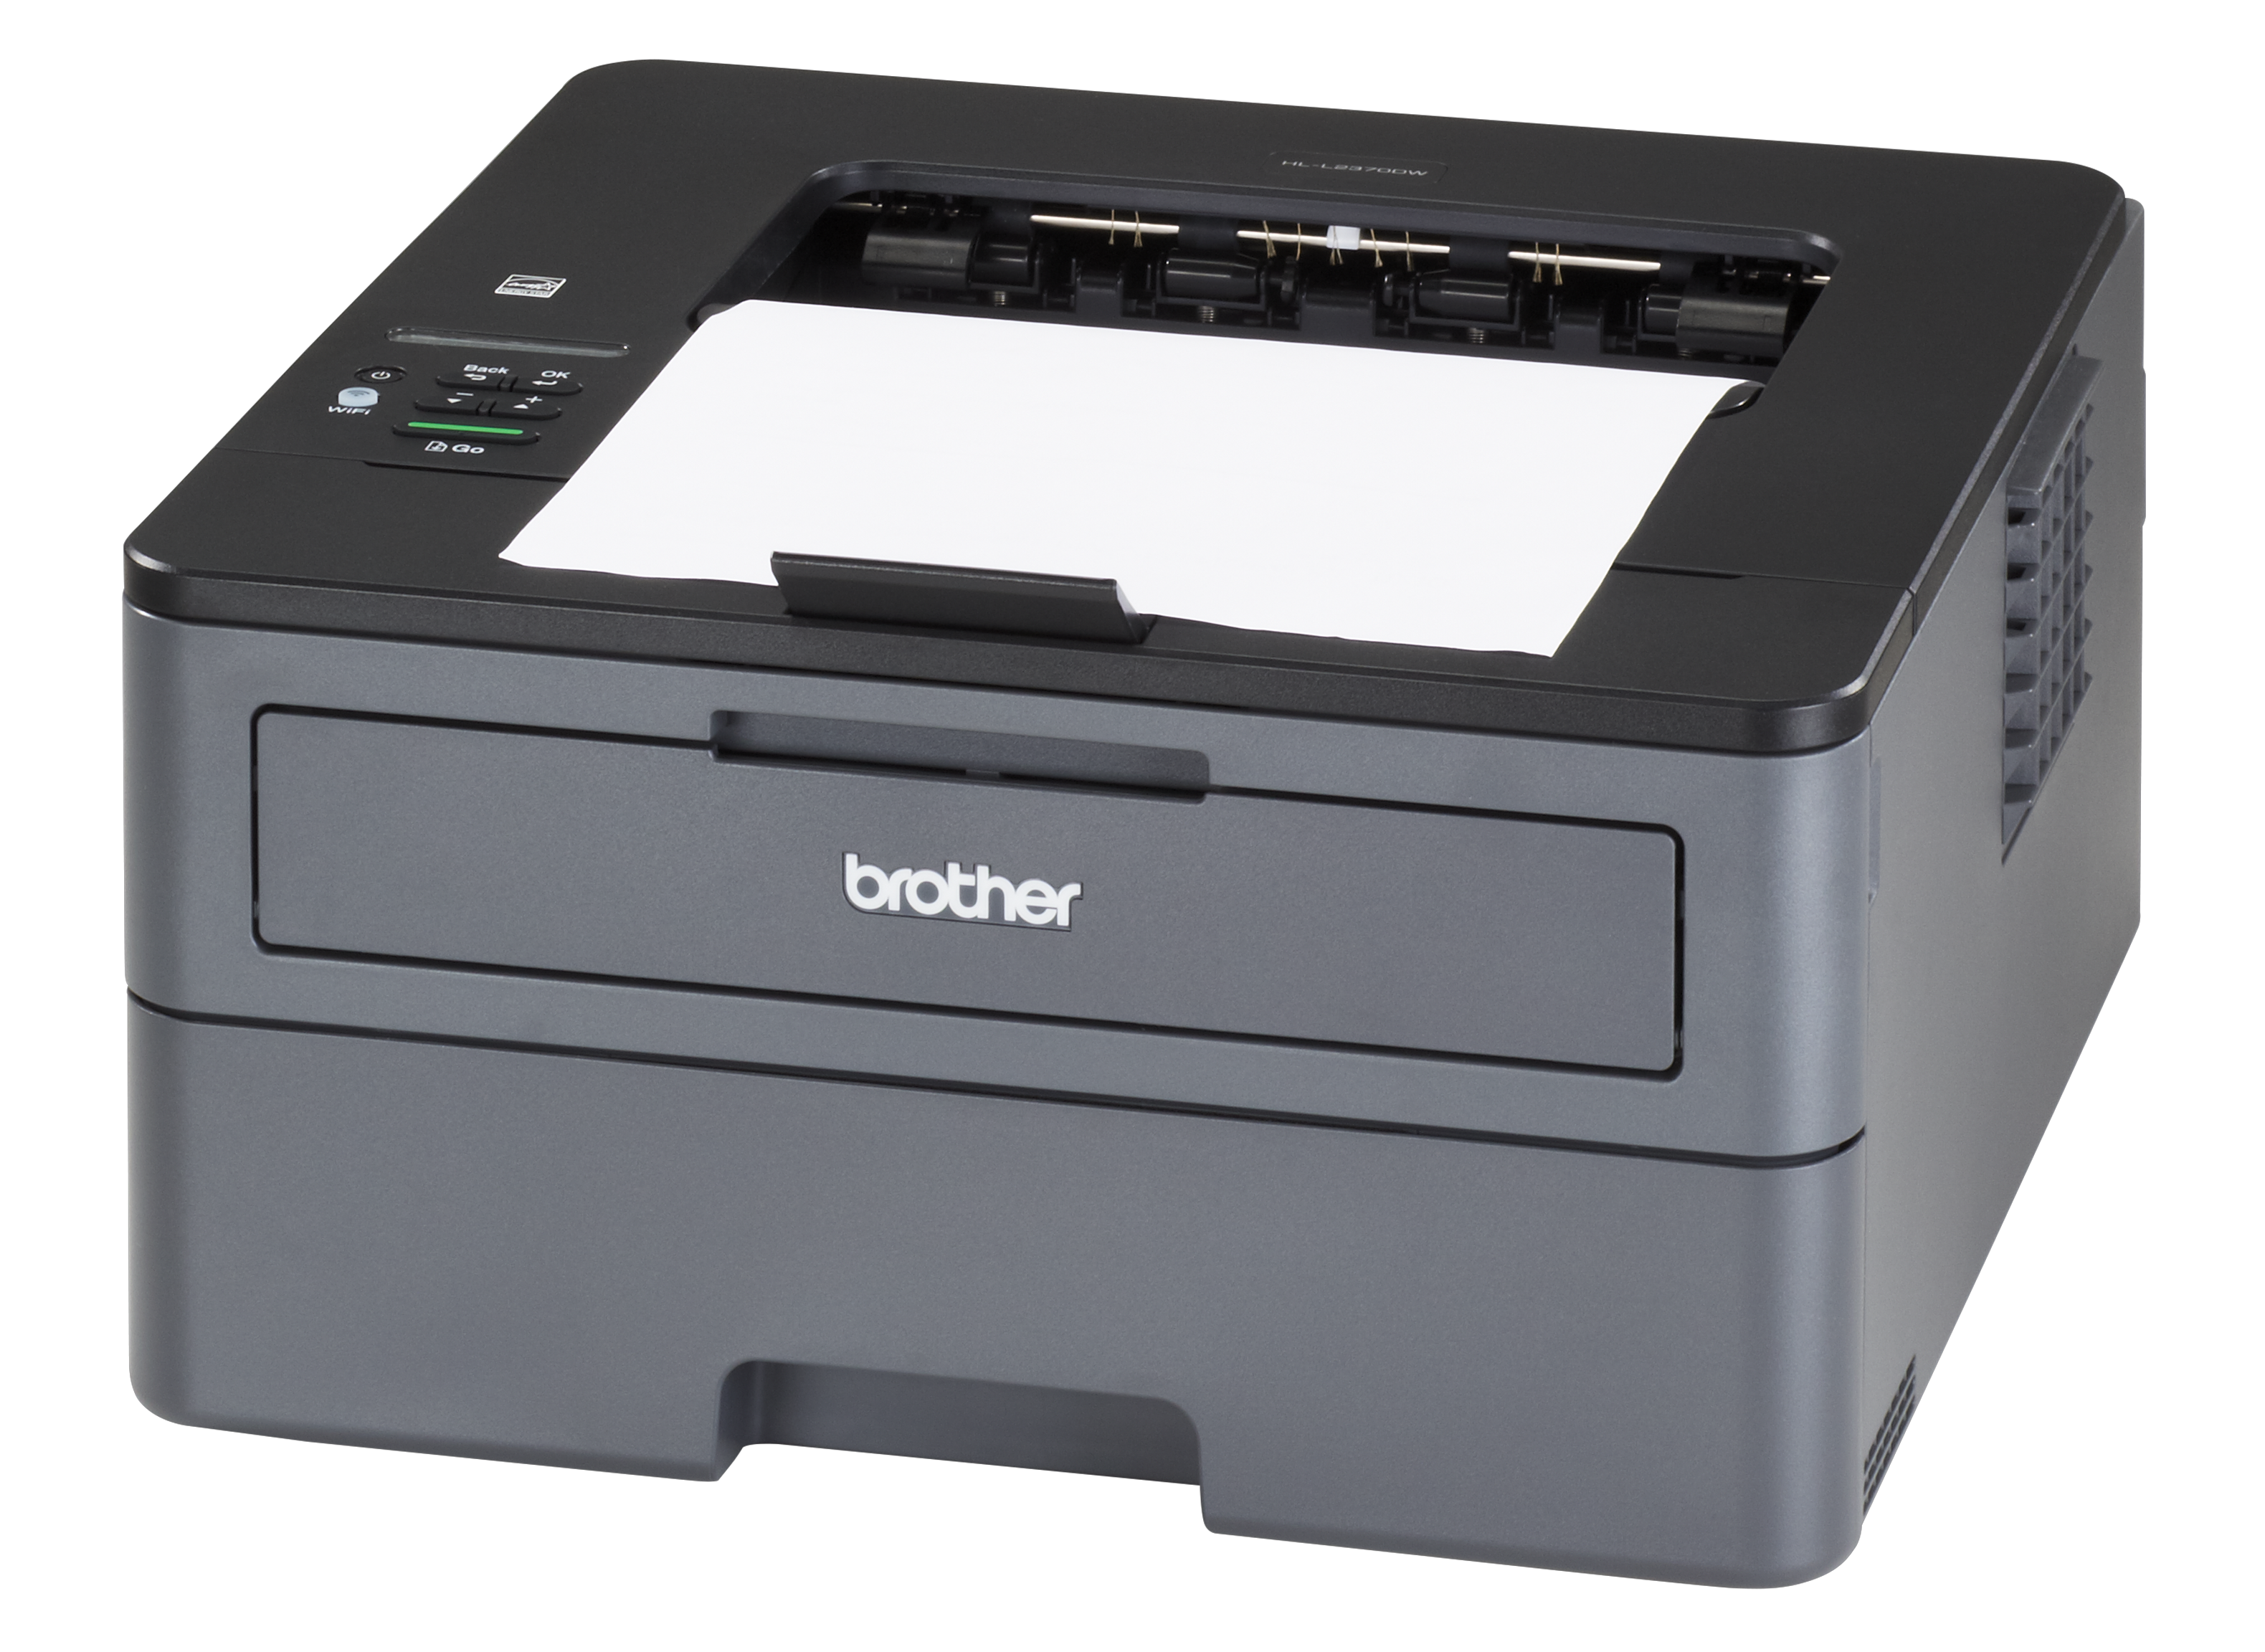 Brother HL-L2350DW Printer Review - Consumer Reports